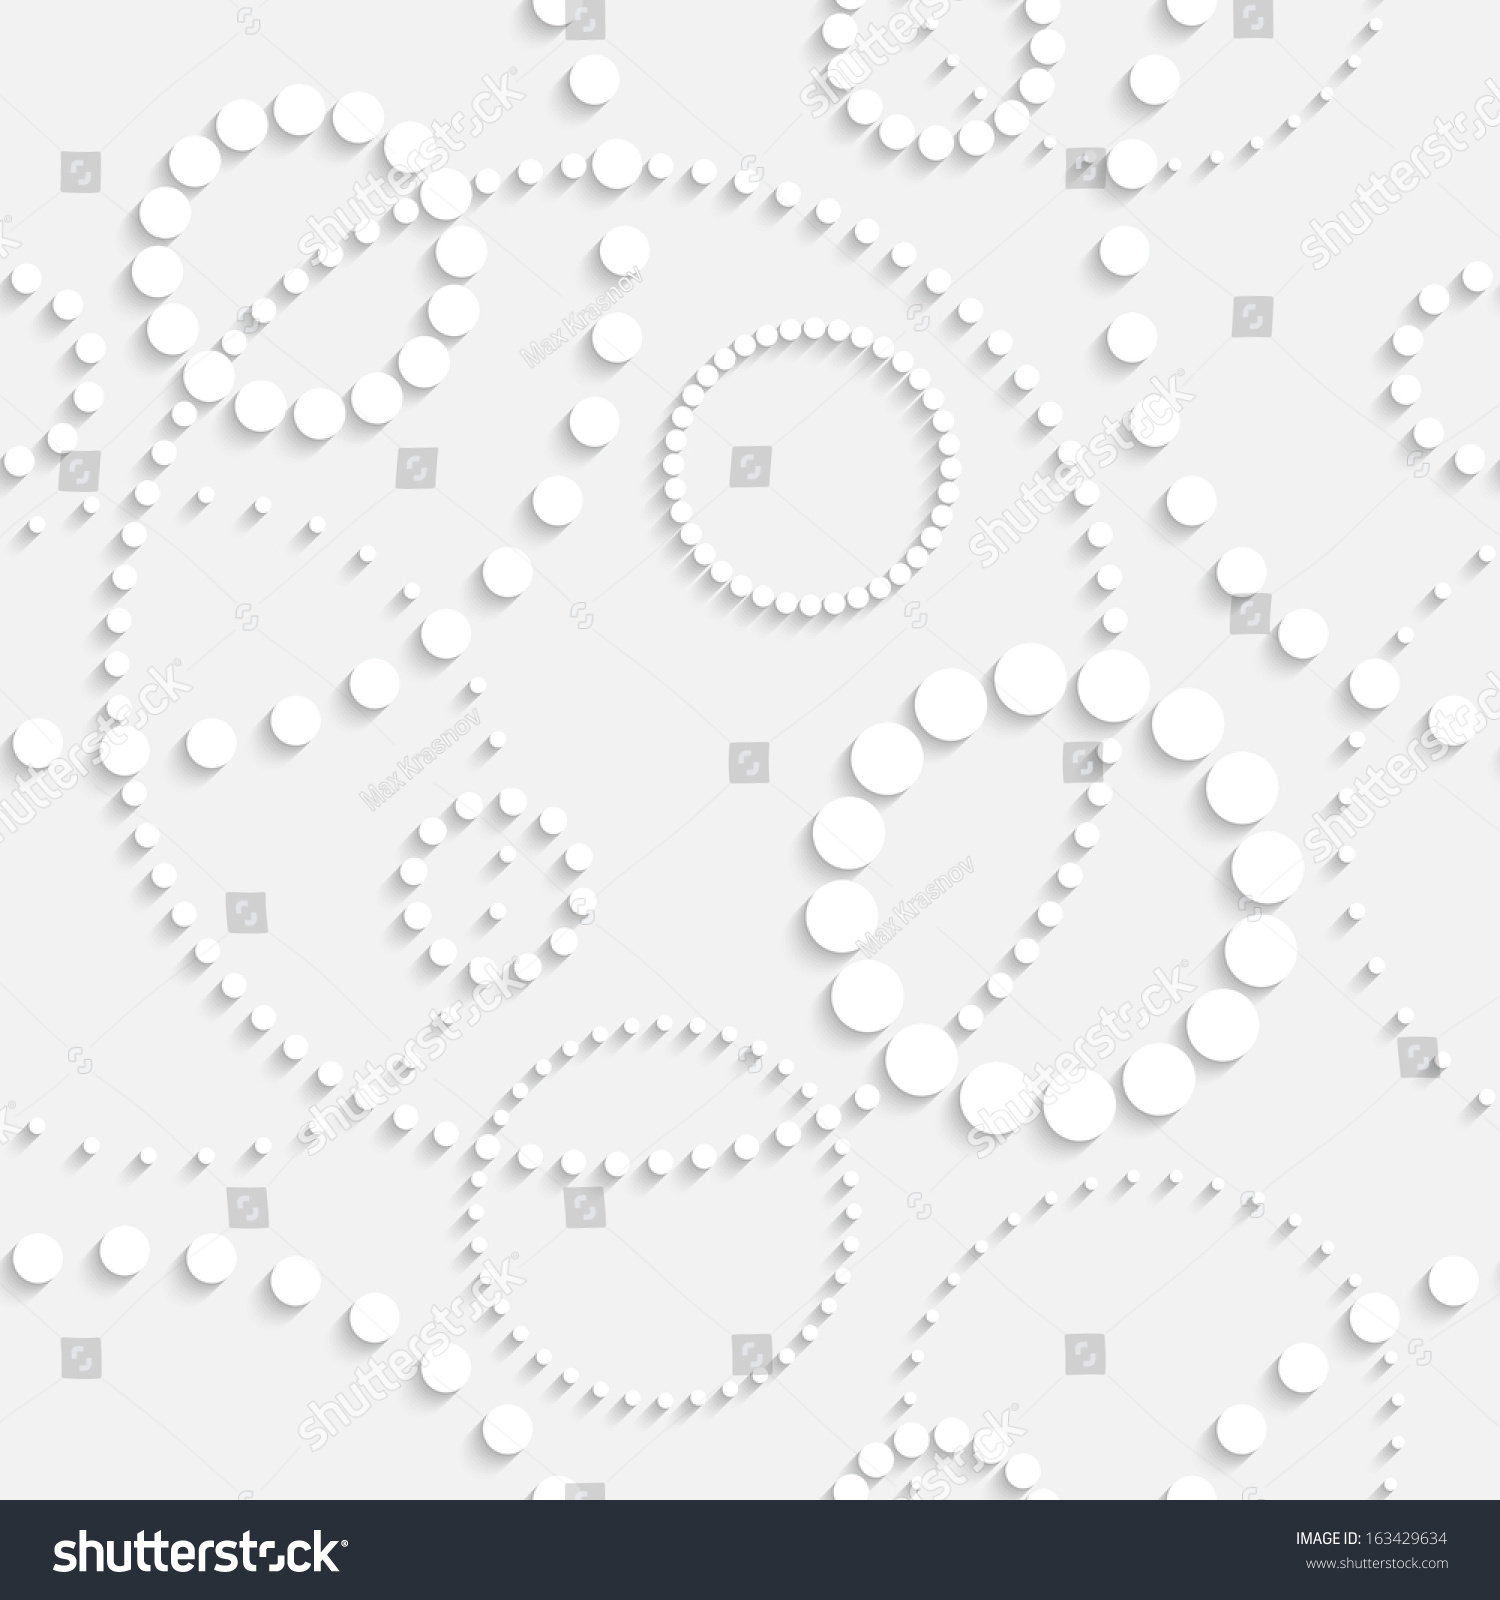 Seamless Circle Background Stock Vector (Royalty Free) 163429634